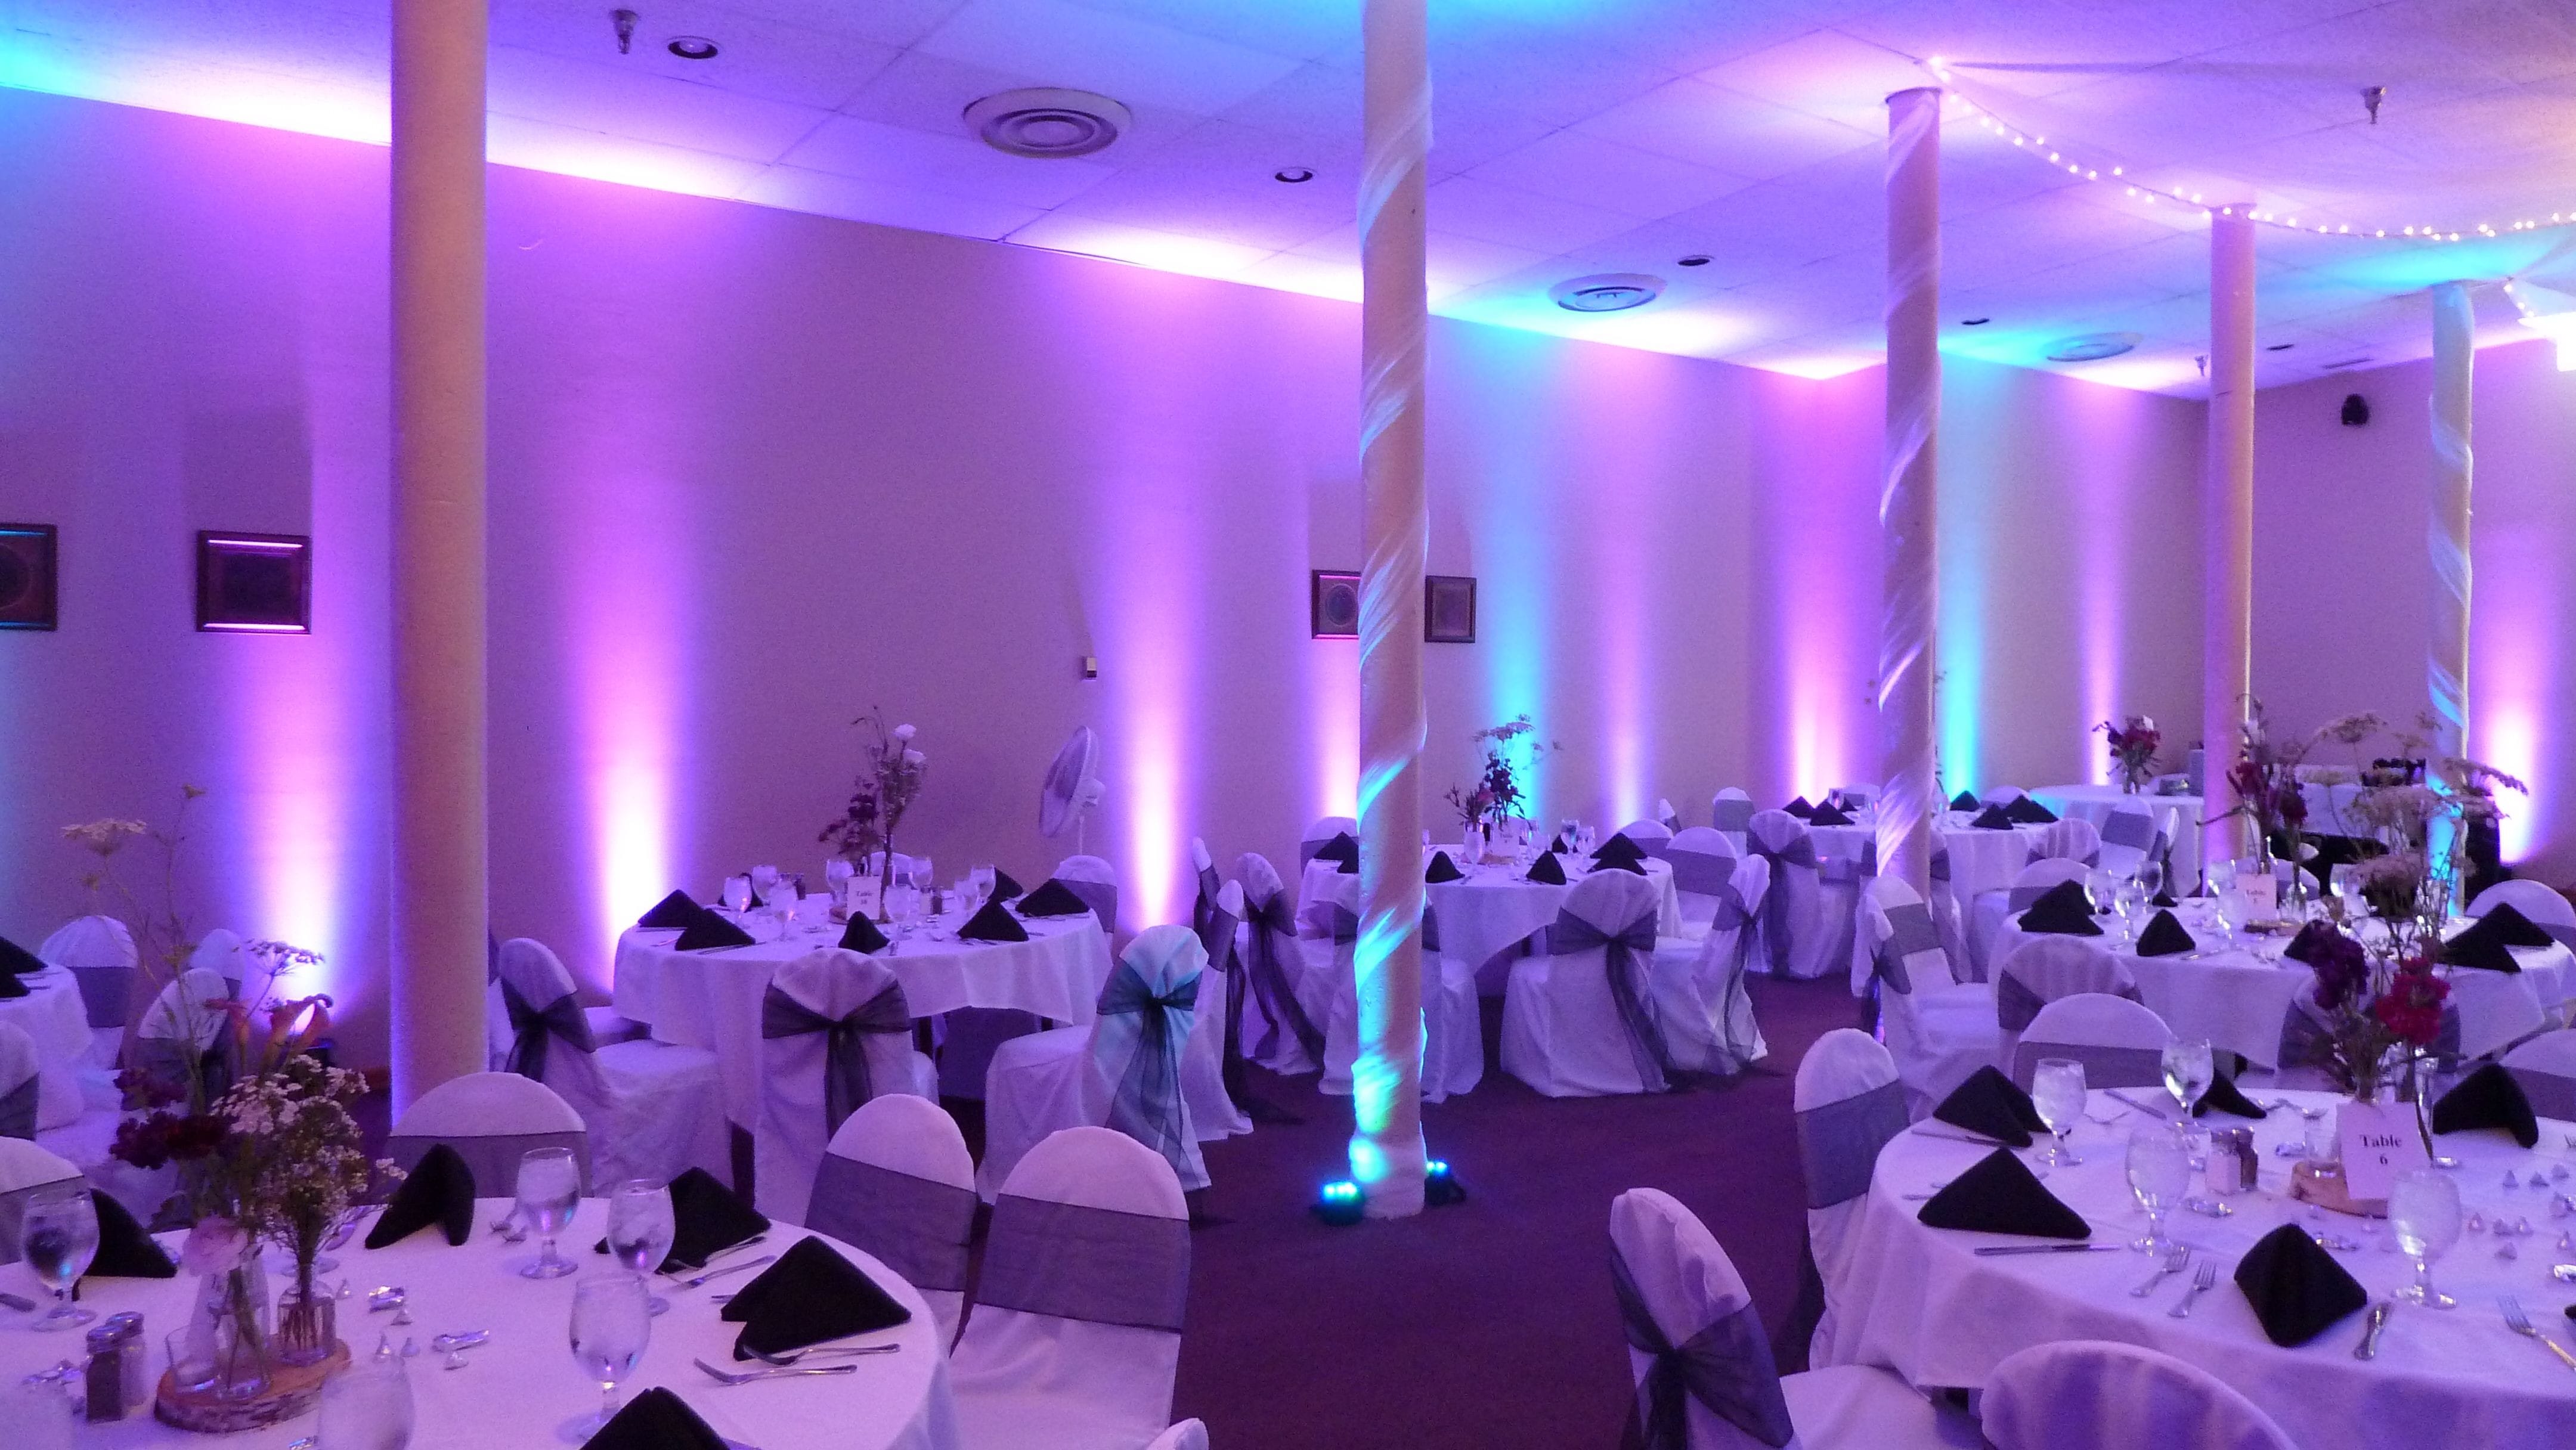 Wedding lighting in the August Fitger room. Up lighting in teal and purple.